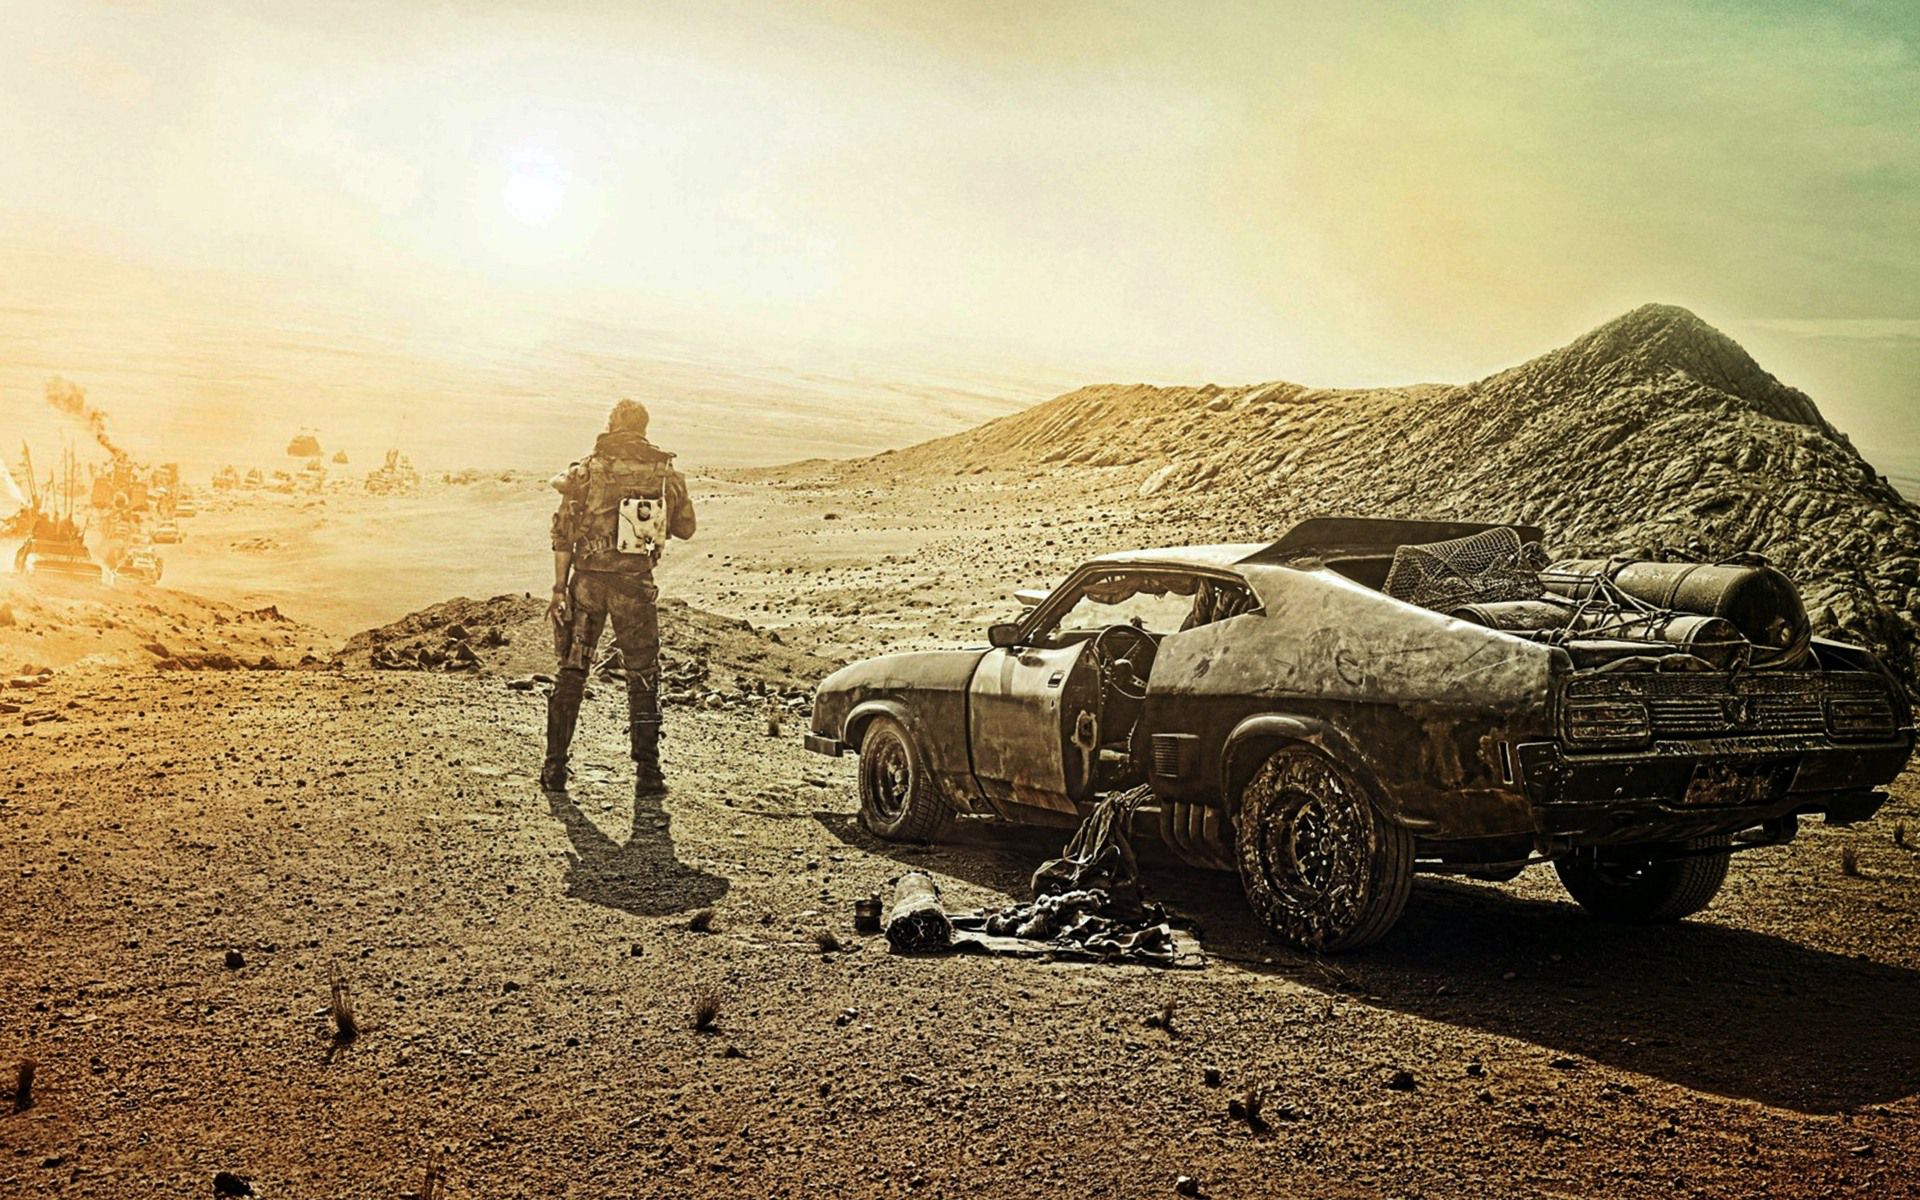 2015 Mad Max Fury Road Wallpapers HD Wallpapers